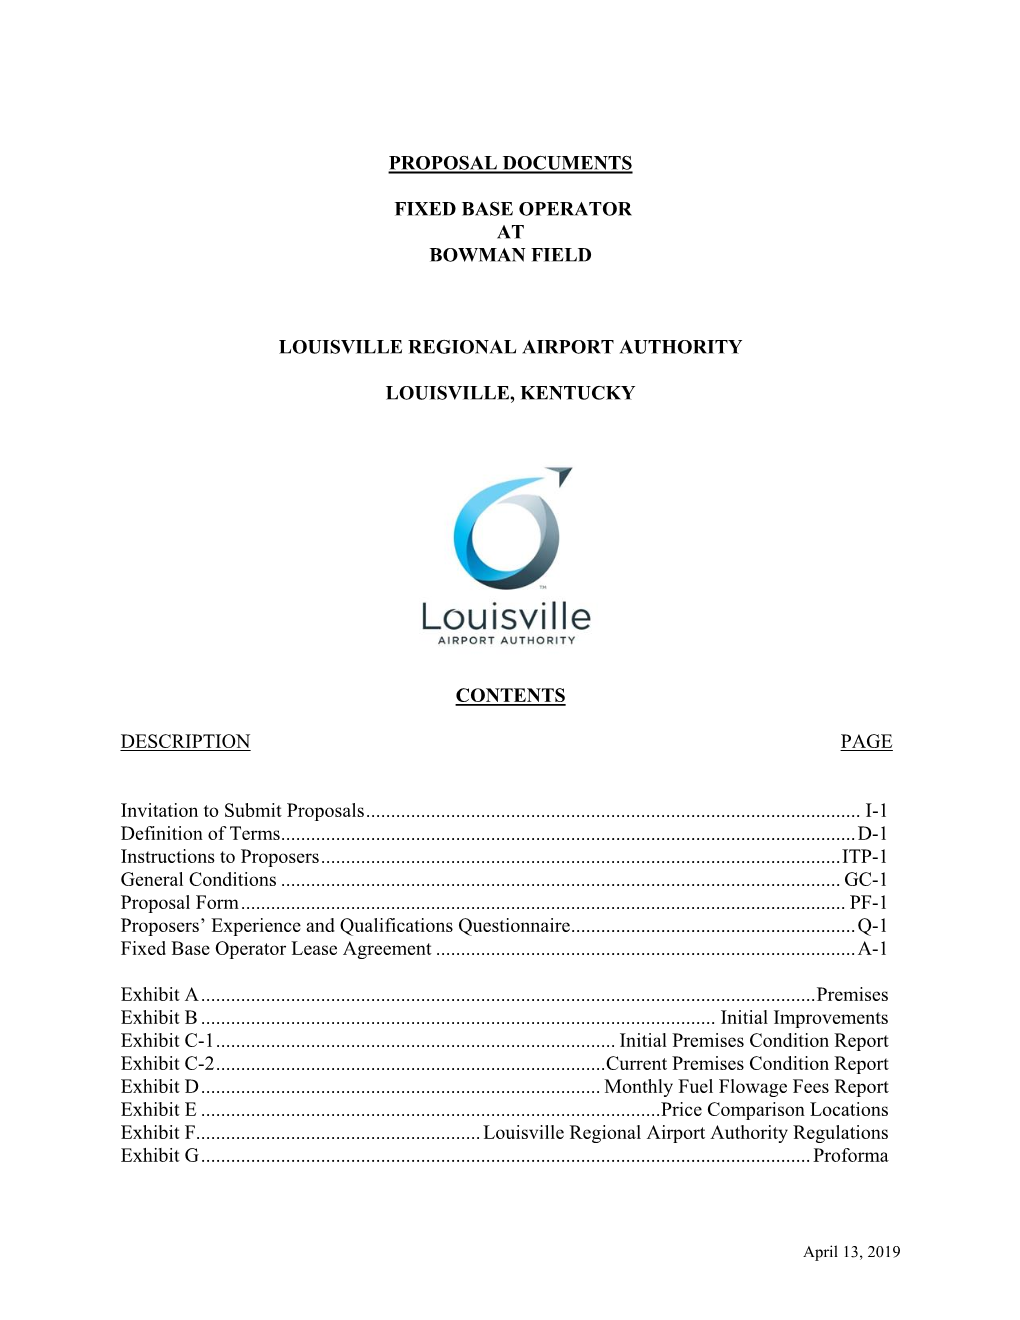 Proposal Documents Fixed Base Operator at Bowman Field Louisville Regional Airport Authority Louisville, Kentucky Contents Descr